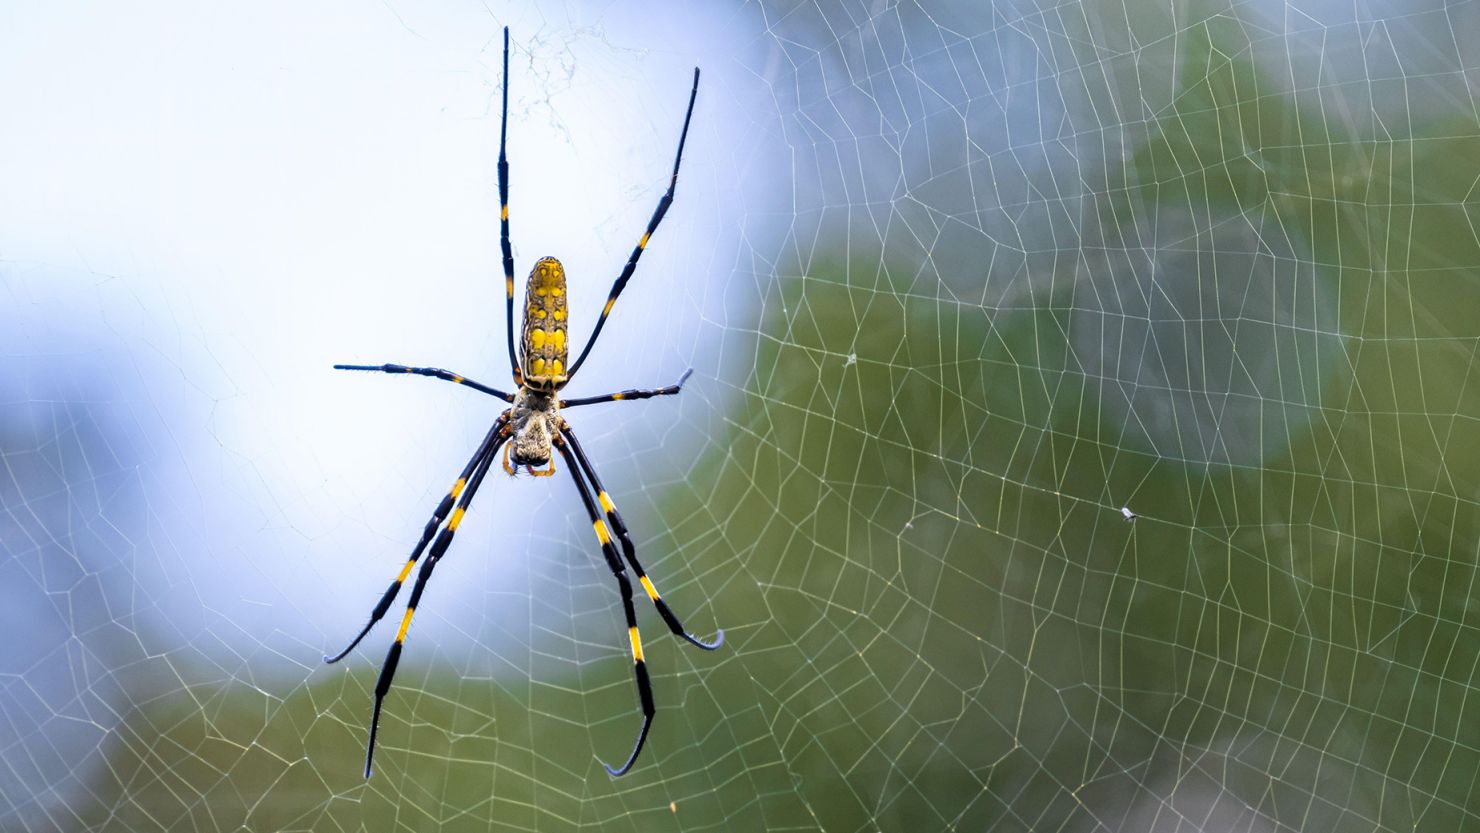 Jorō spiders were first spotted in the United States around 2013 and have since spread rapidly across the southeastern region.